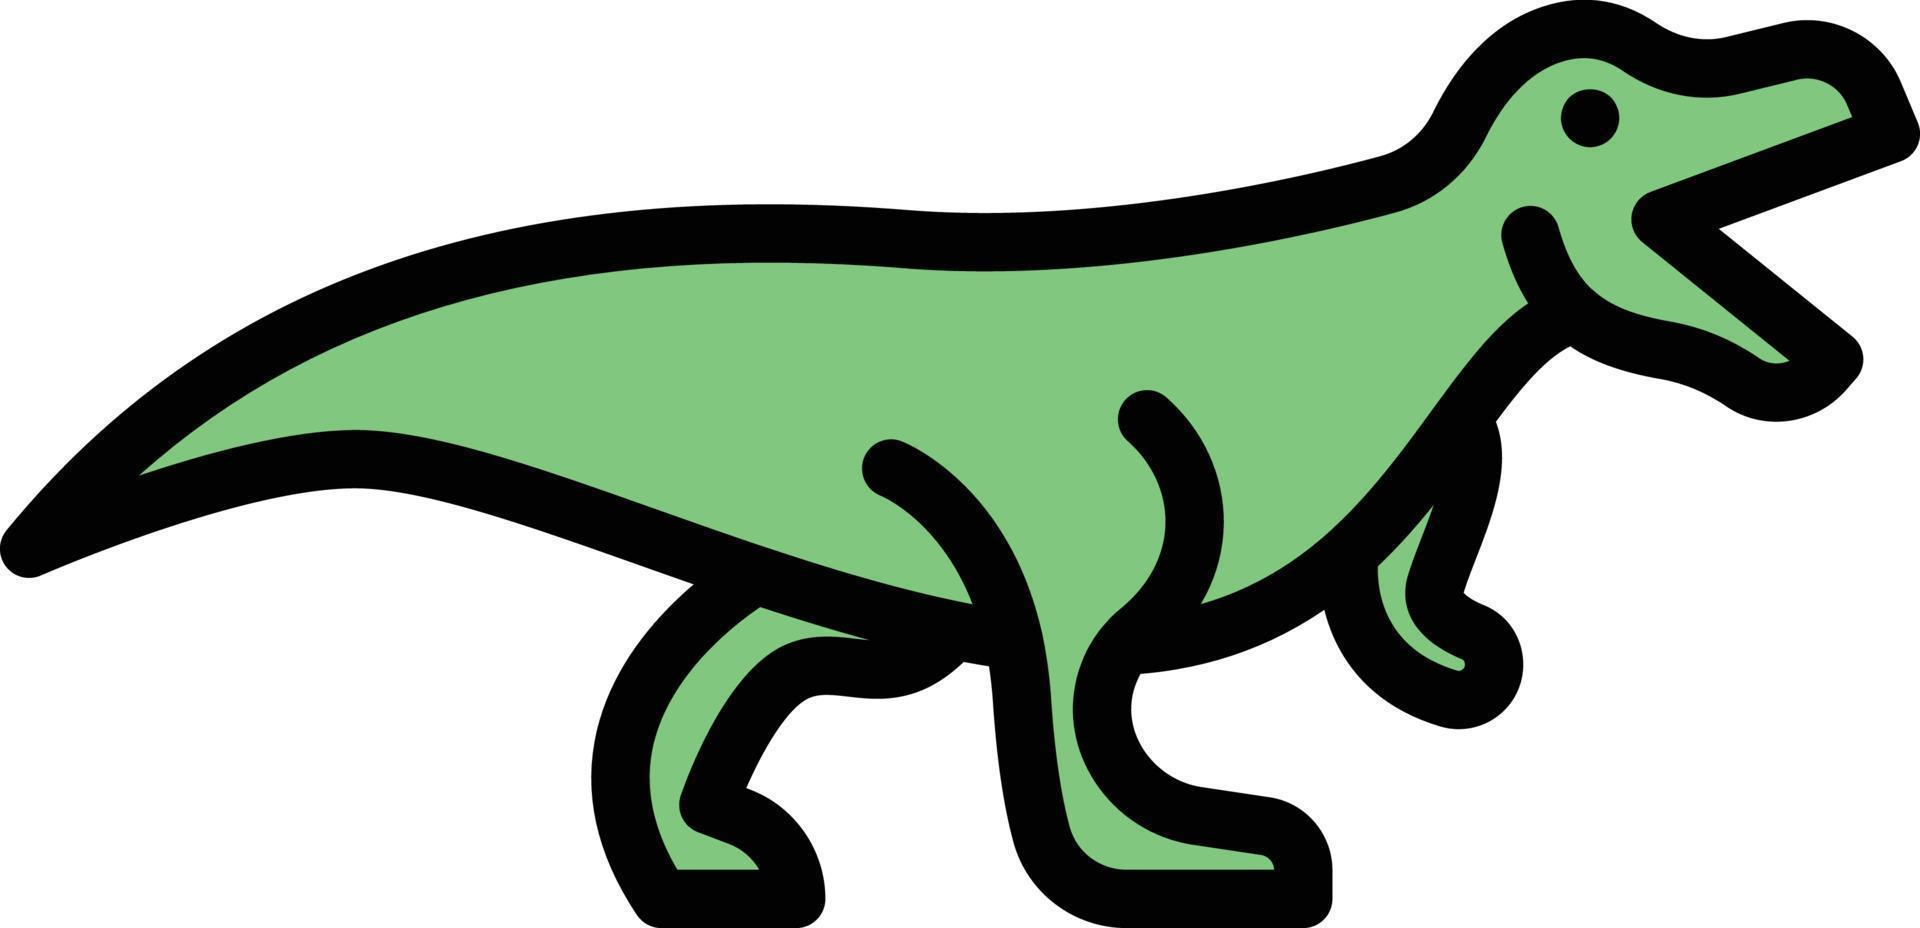 allosaurus vector illustration on a background.Premium quality symbols.vector icons for concept and graphic design.